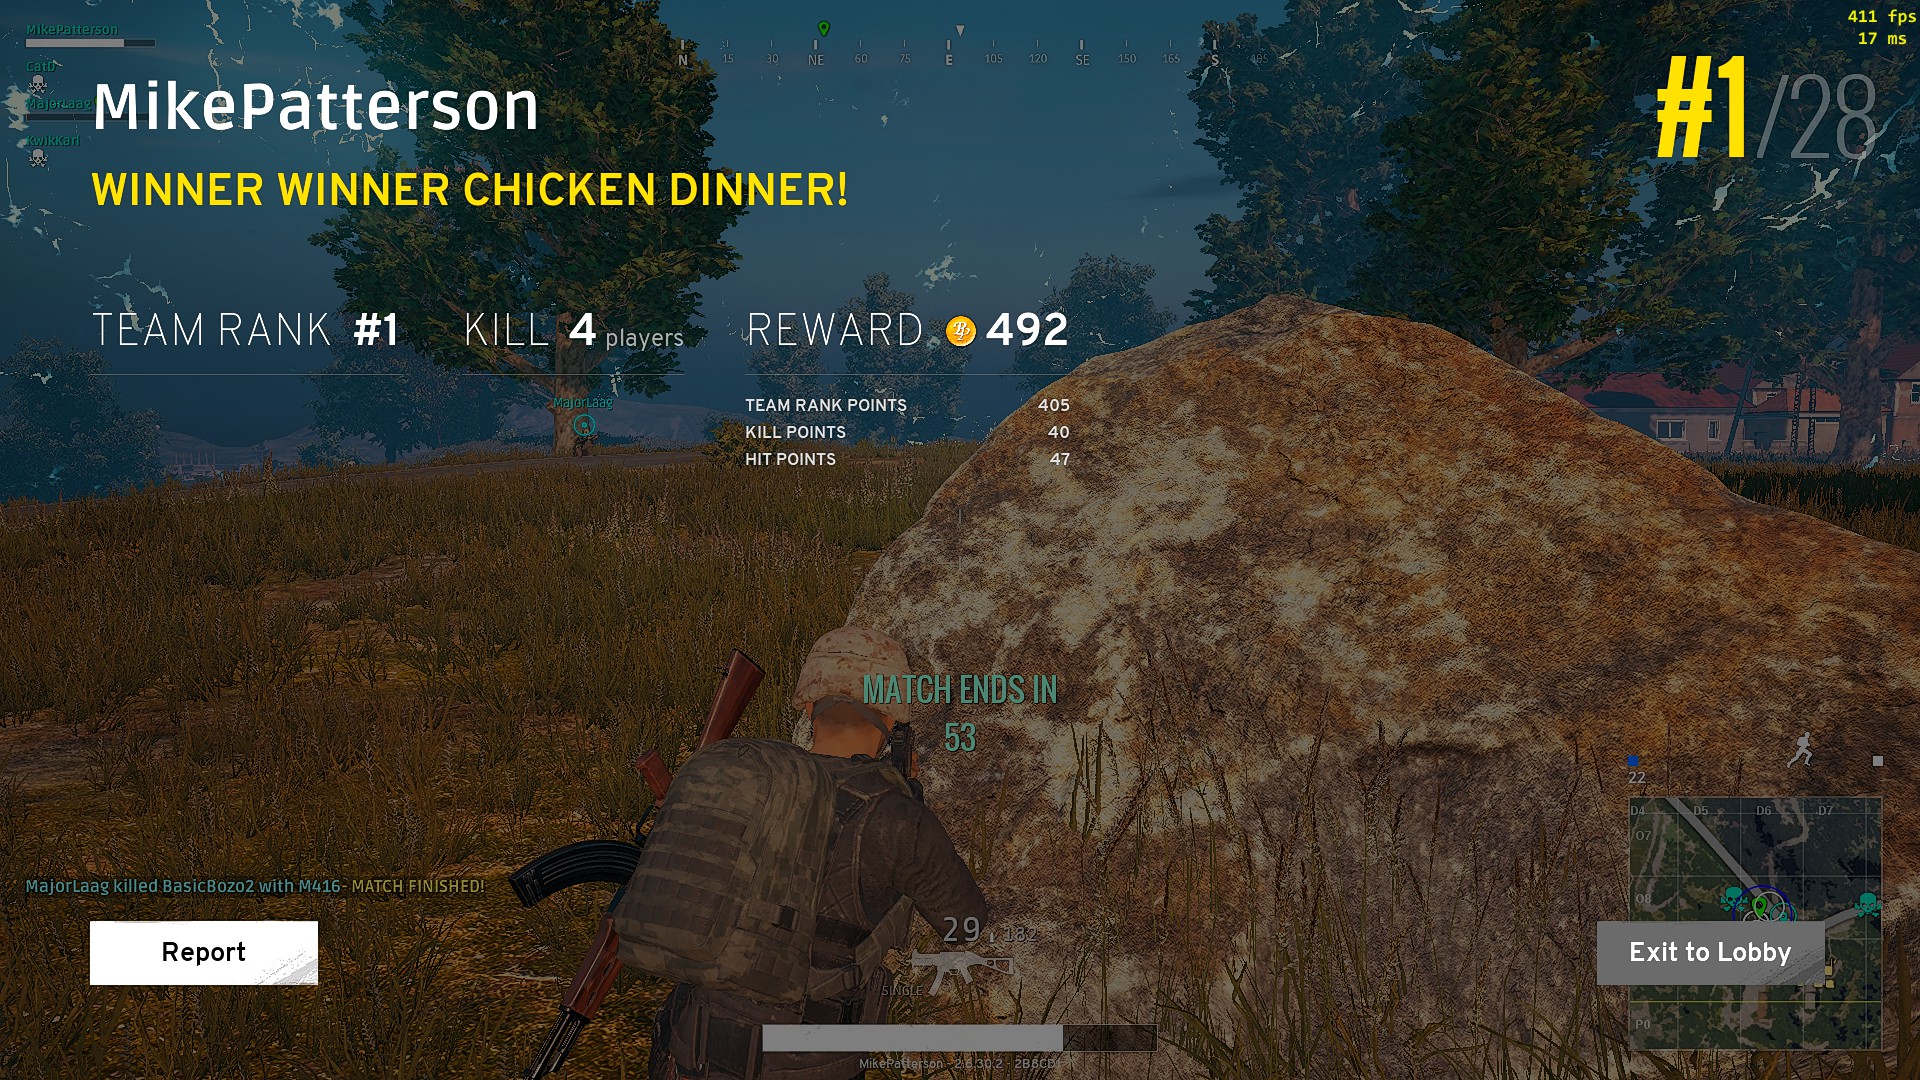 Lets see your Winner Winner Chicken Dinner screenshots! - Page 2 38D85FB073E79D03664BBBF64F09E40A210985A6